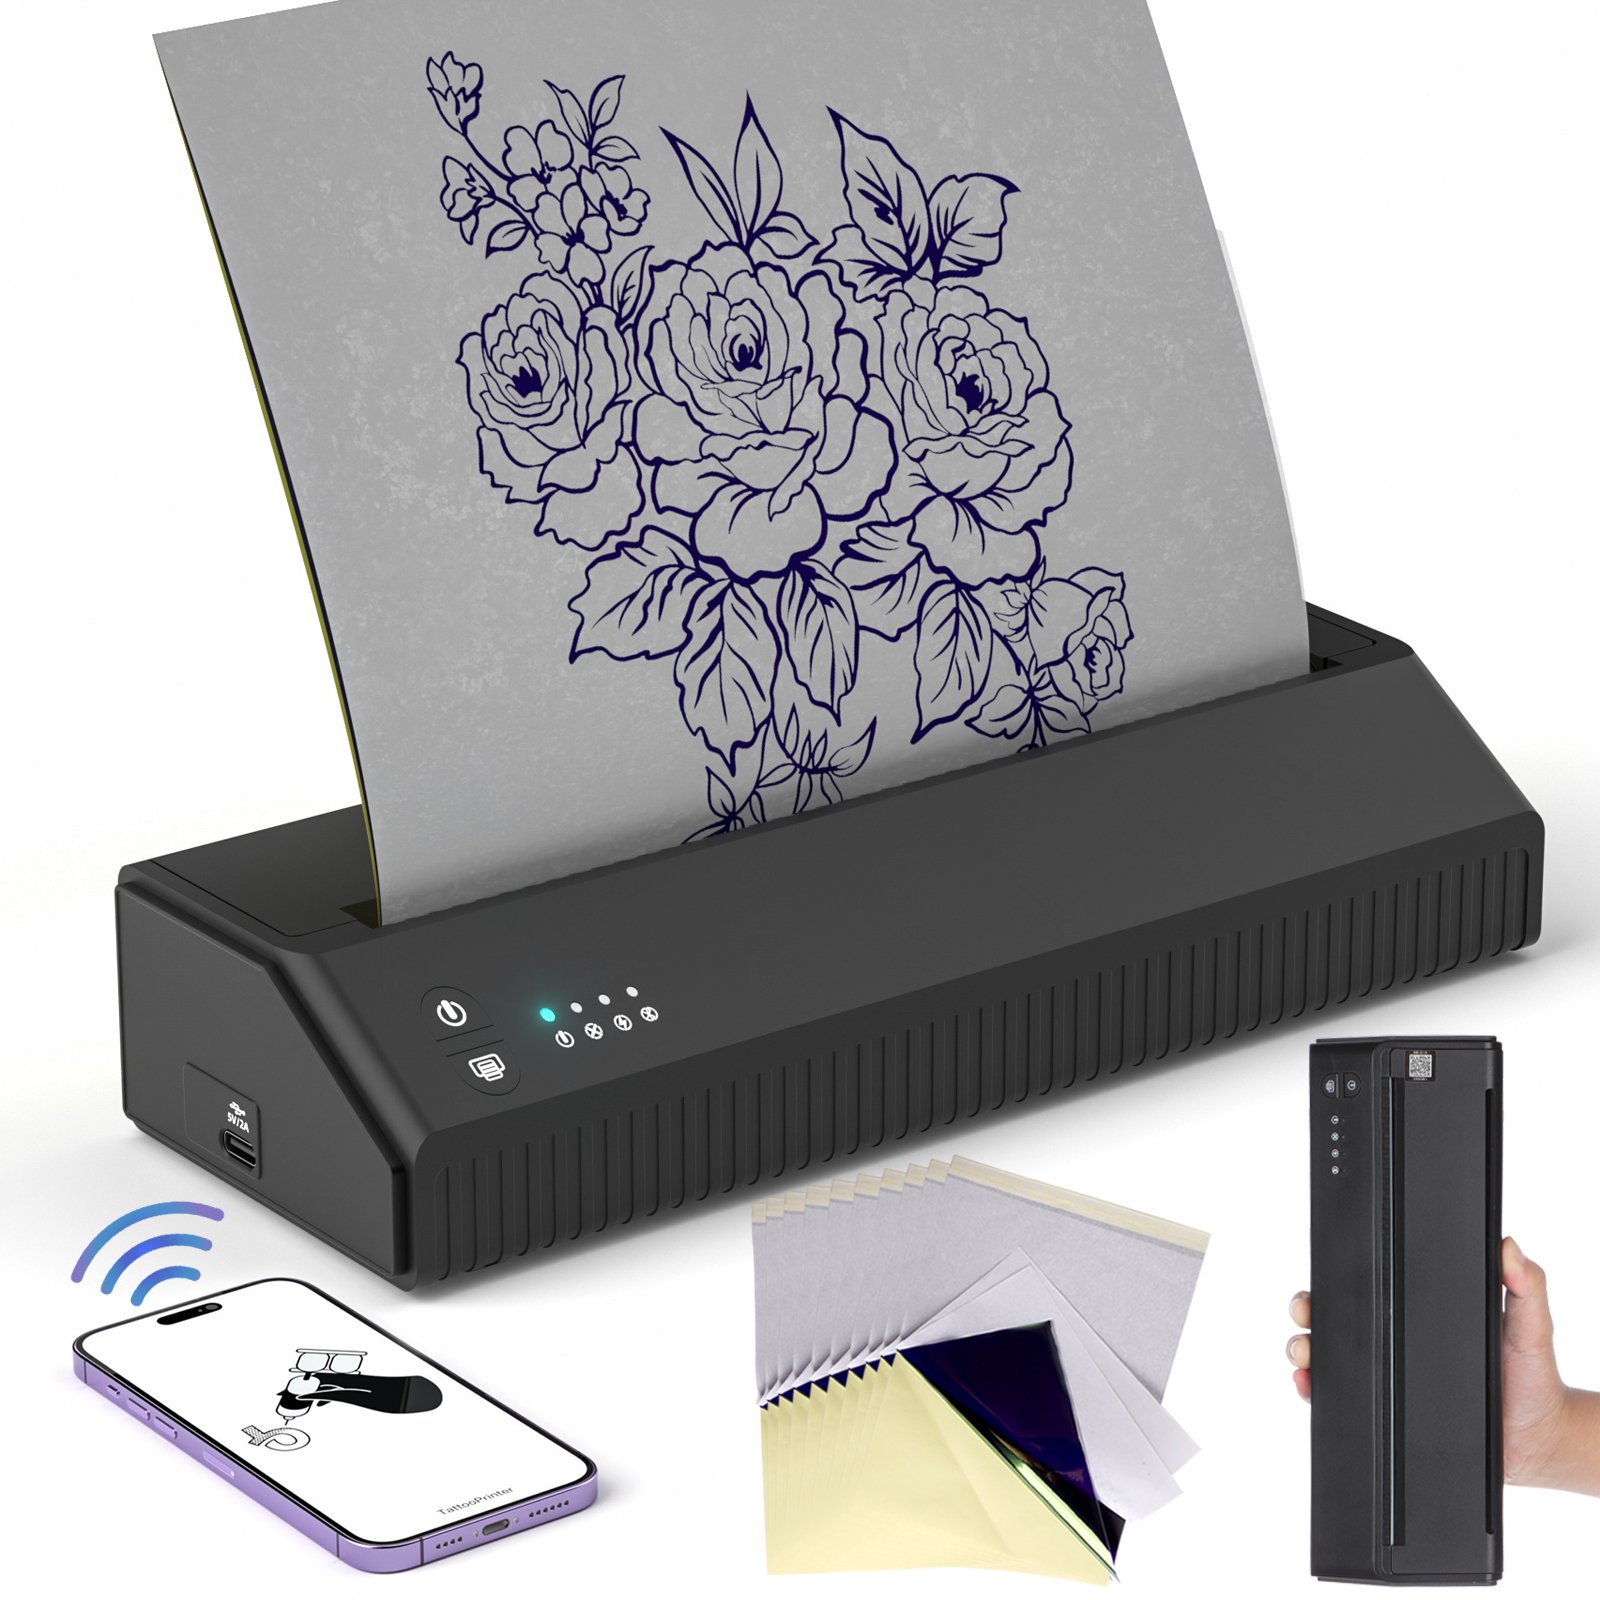 Can You Use a Regular Printer for Tattoo Transfer Paper? - AuthorityTattoo